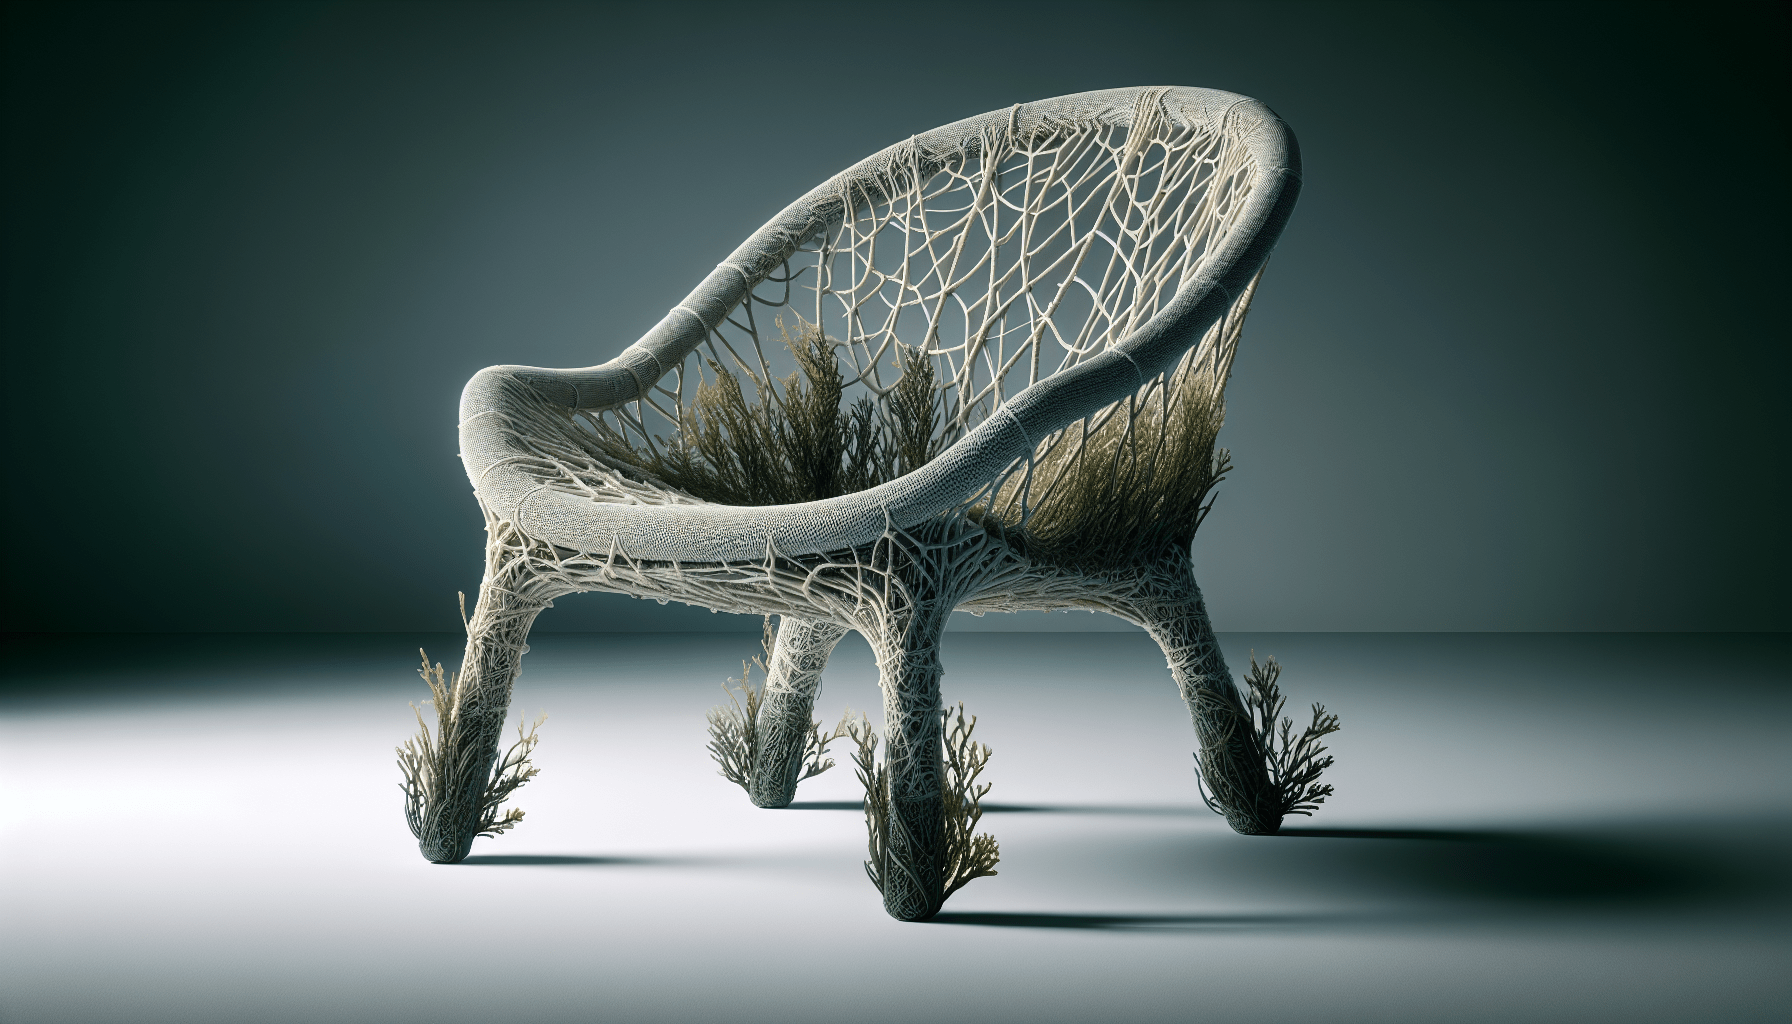 kelp-collection-a-3d-printed-chair-made-from-recycled-fishing-nets Kelp Collection: A 3D-Printed Chair Made from Recycled Fishing Nets